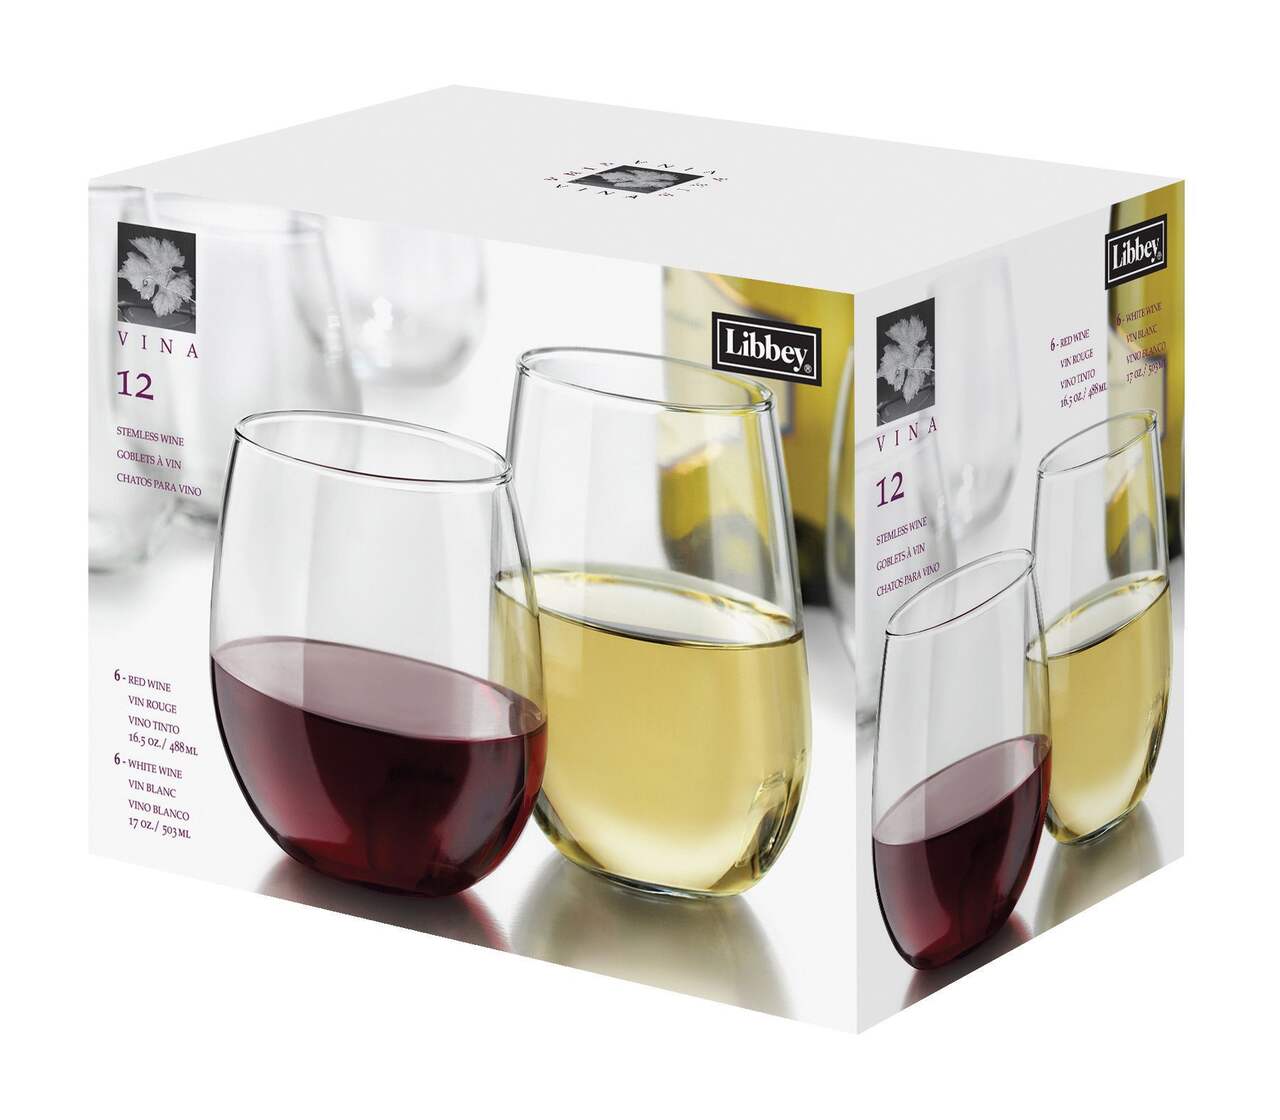 https://media-www.canadiantire.ca/product/living/kitchen/dining-and-entertaining/1421845/stemless-wine-12-piece-set-4c1154f7-e14e-498d-8ed0-b15f19e4cb18-jpgrendition.jpg?imdensity=1&imwidth=640&impolicy=mZoom